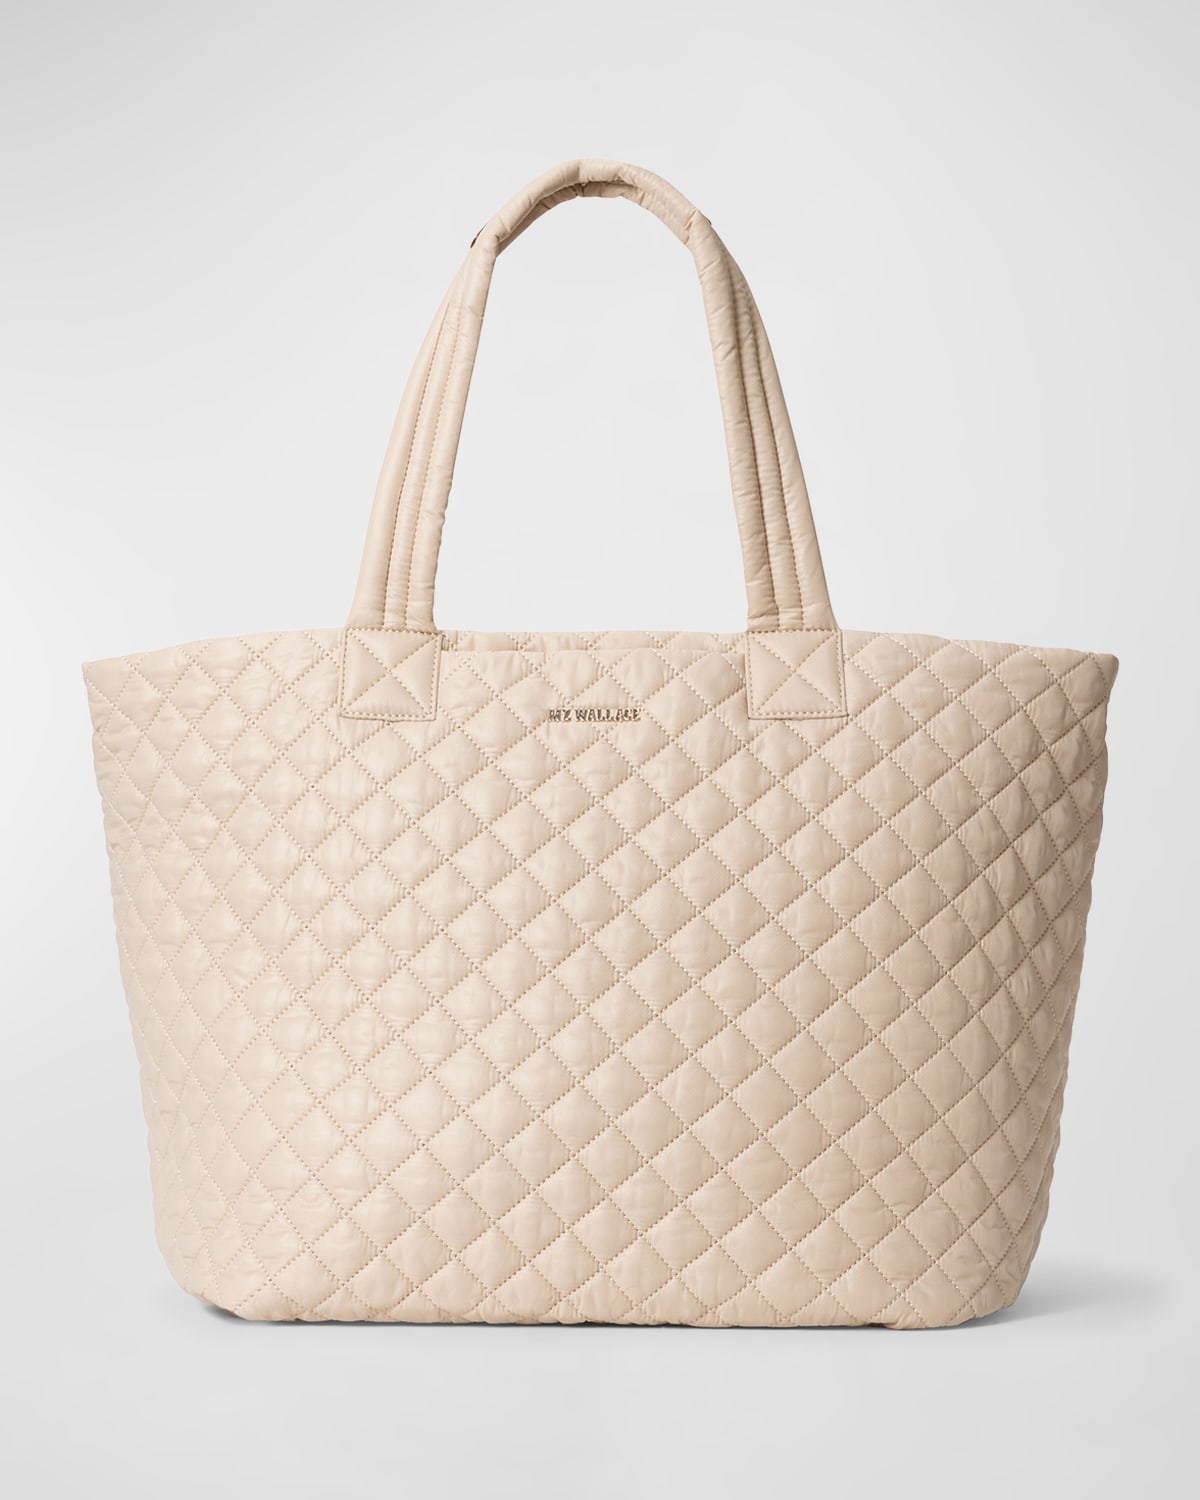 MZ WALLACE LARGE METRO DELUXE QUILTED TOTE BAG